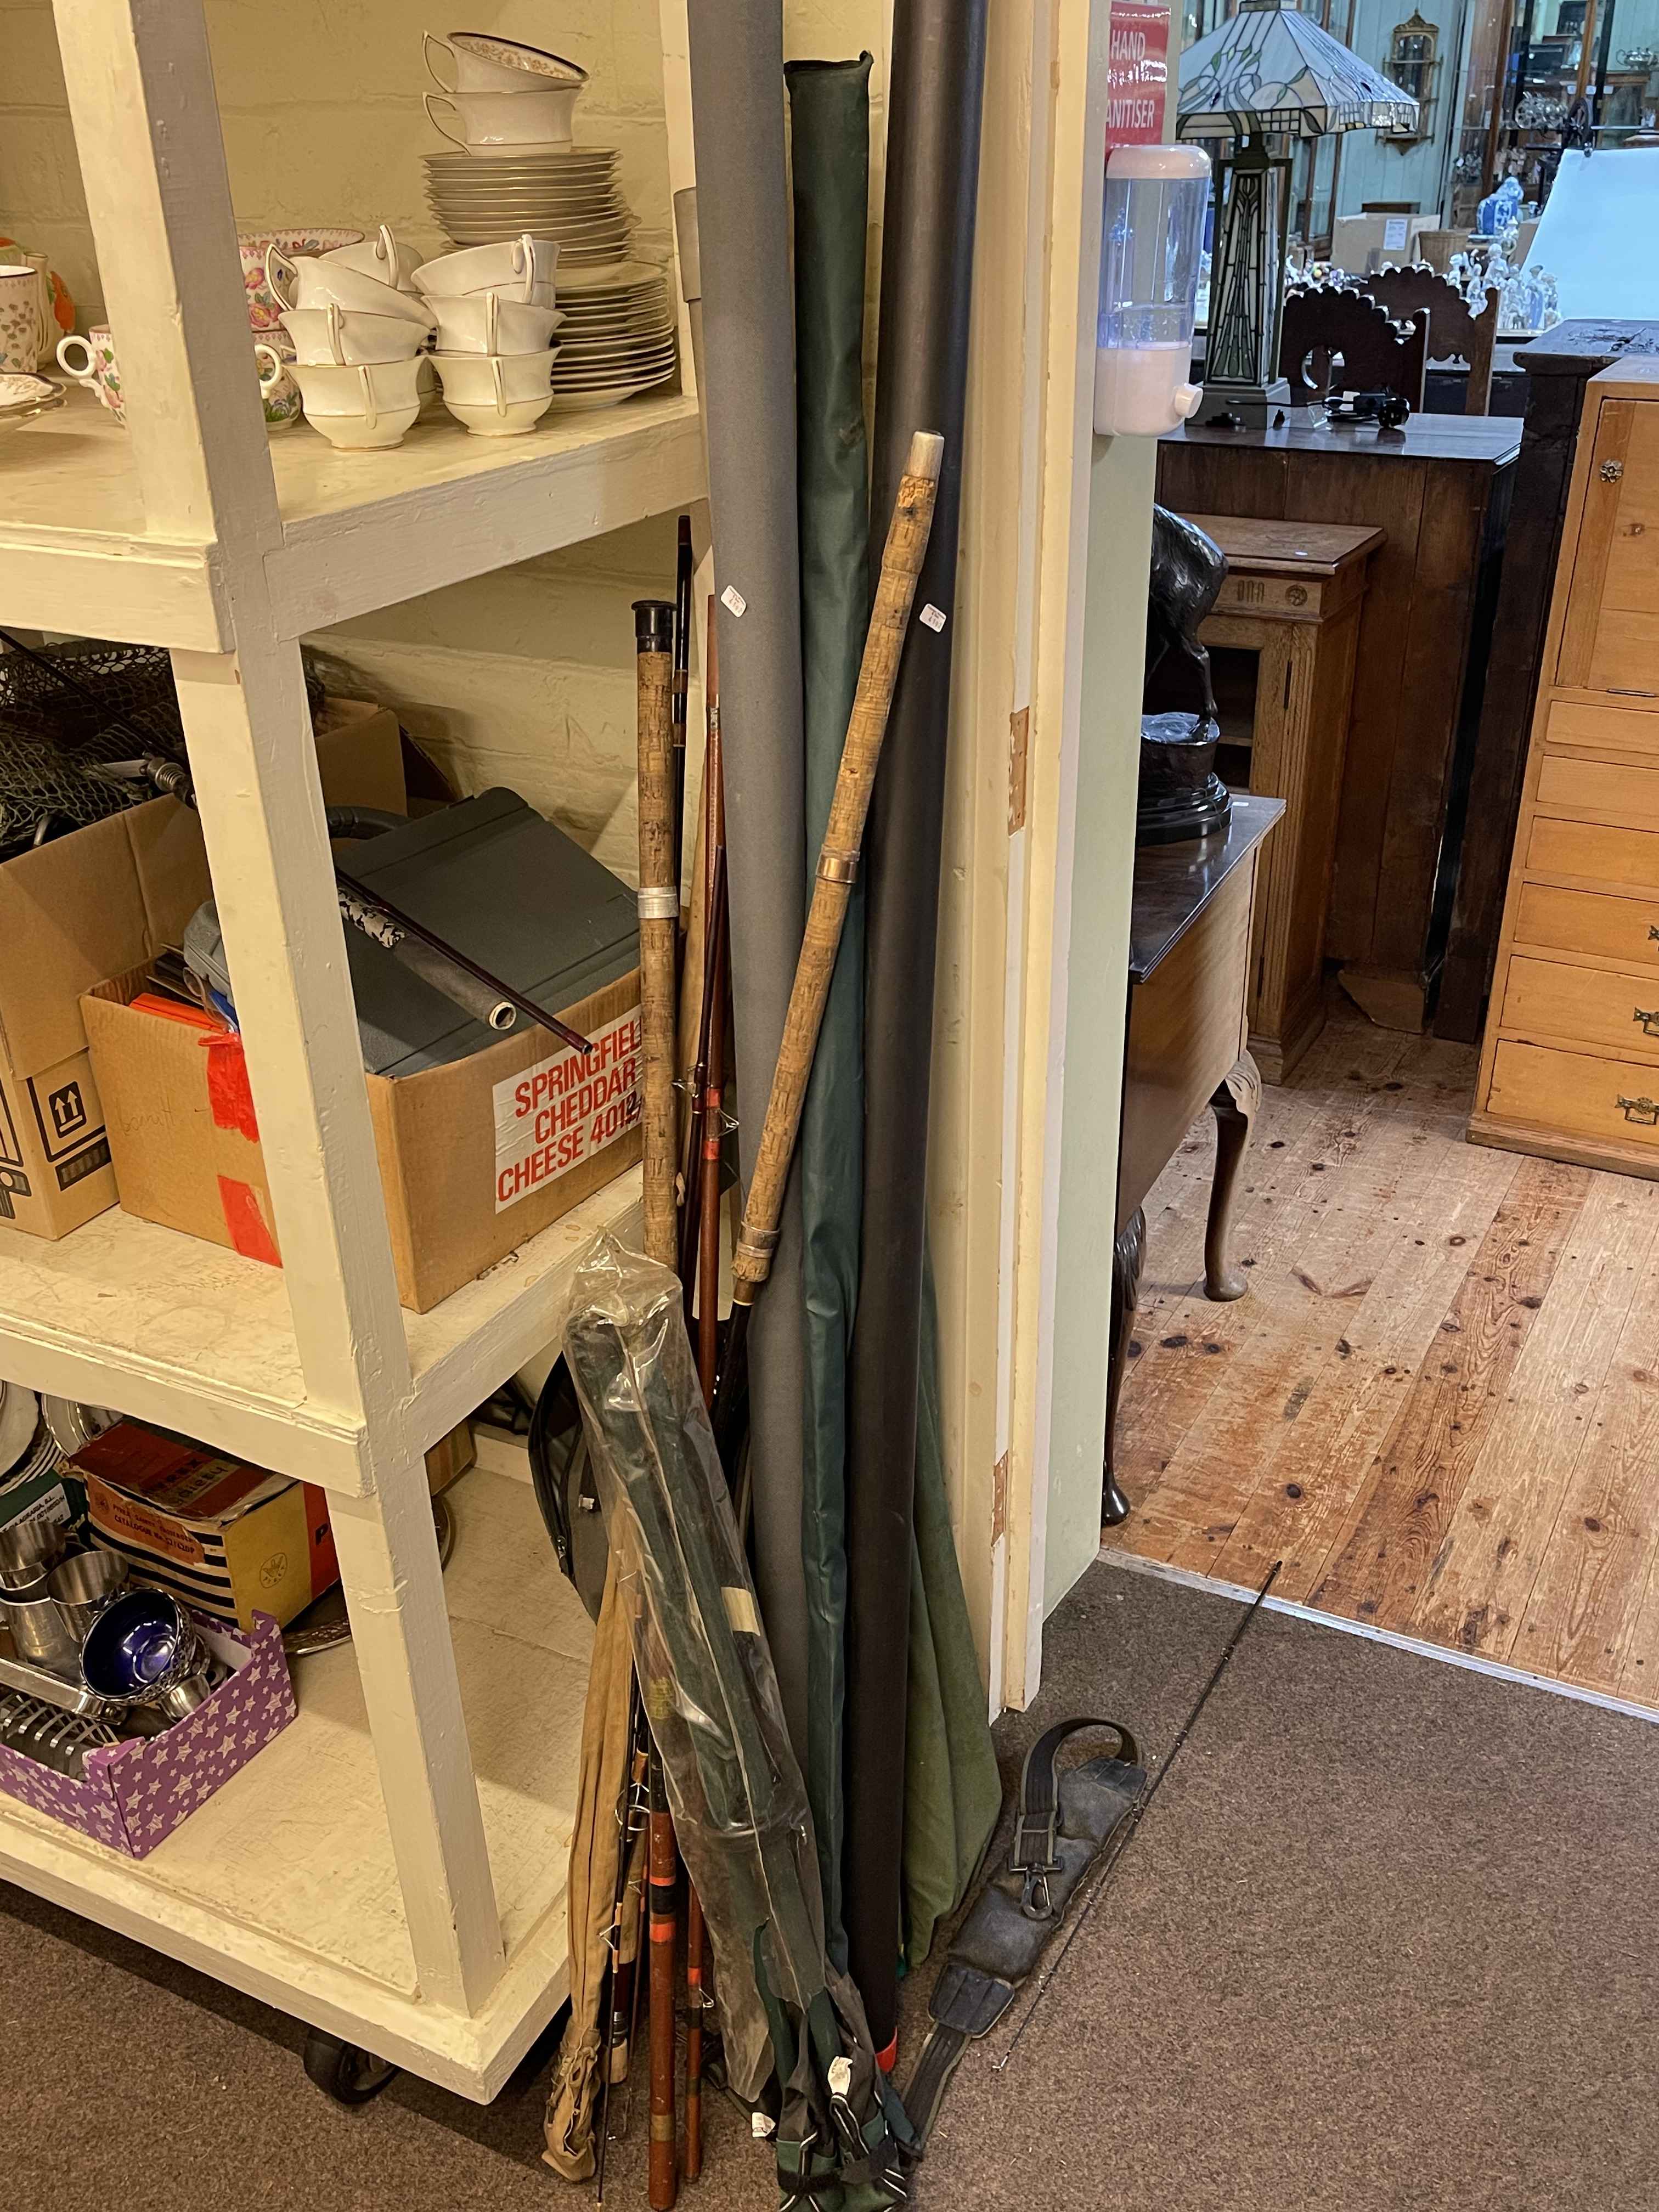 Collection of fishing equipment and rods. - Image 2 of 2